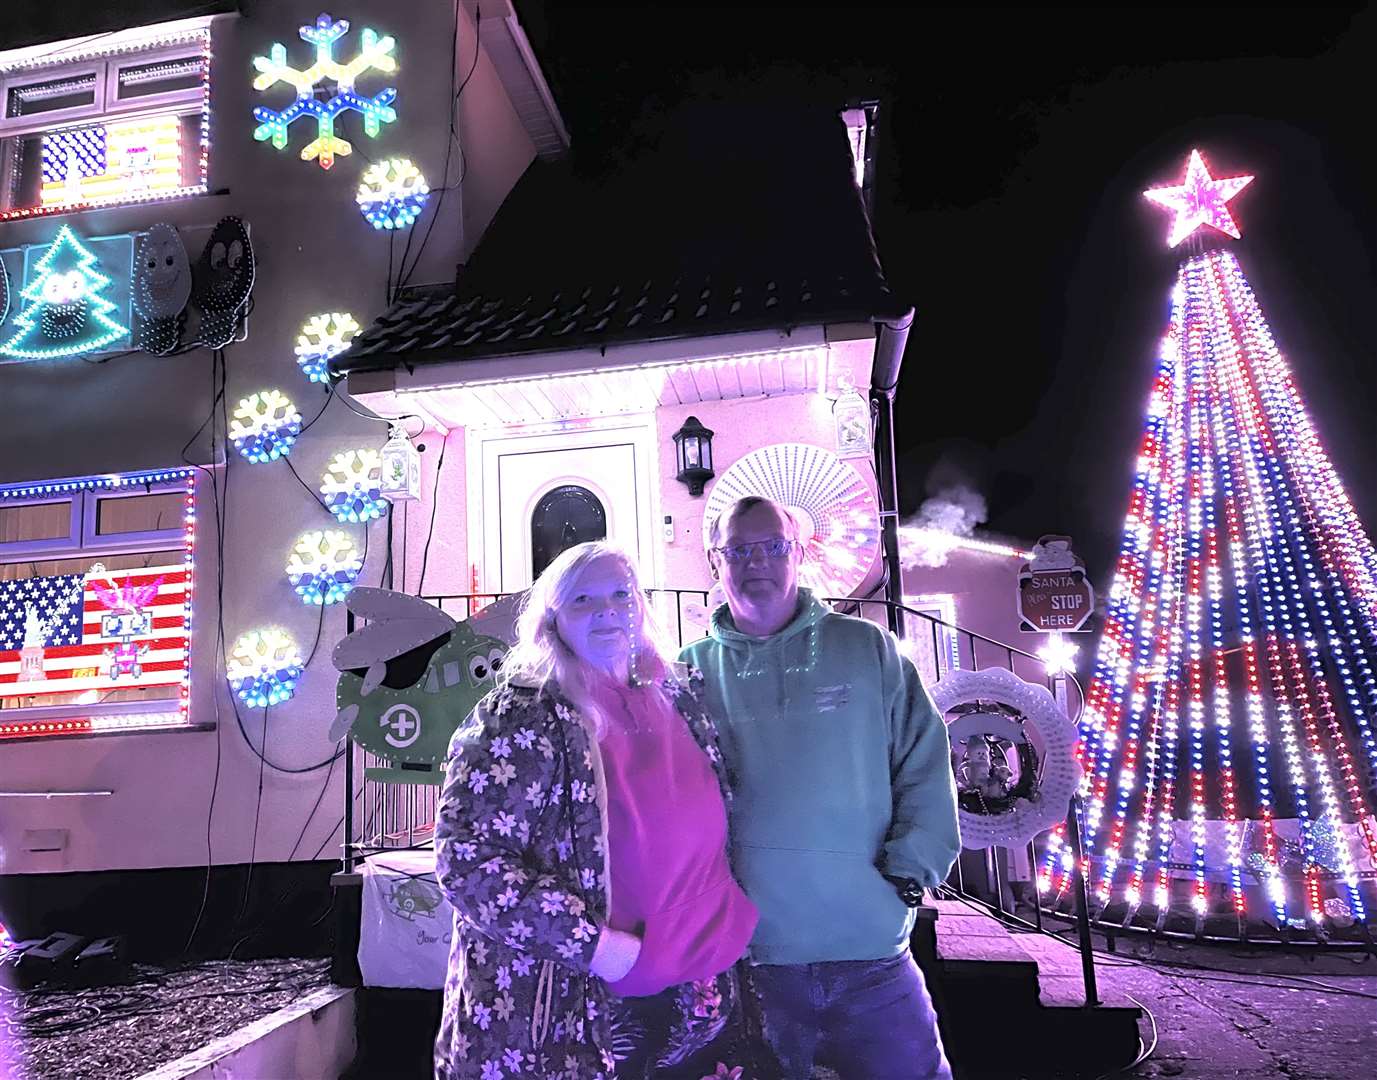 Ian and Ann Cooper transform their home in Bristol into a Christmas light show for the month of December (Ian Cooper/PA)